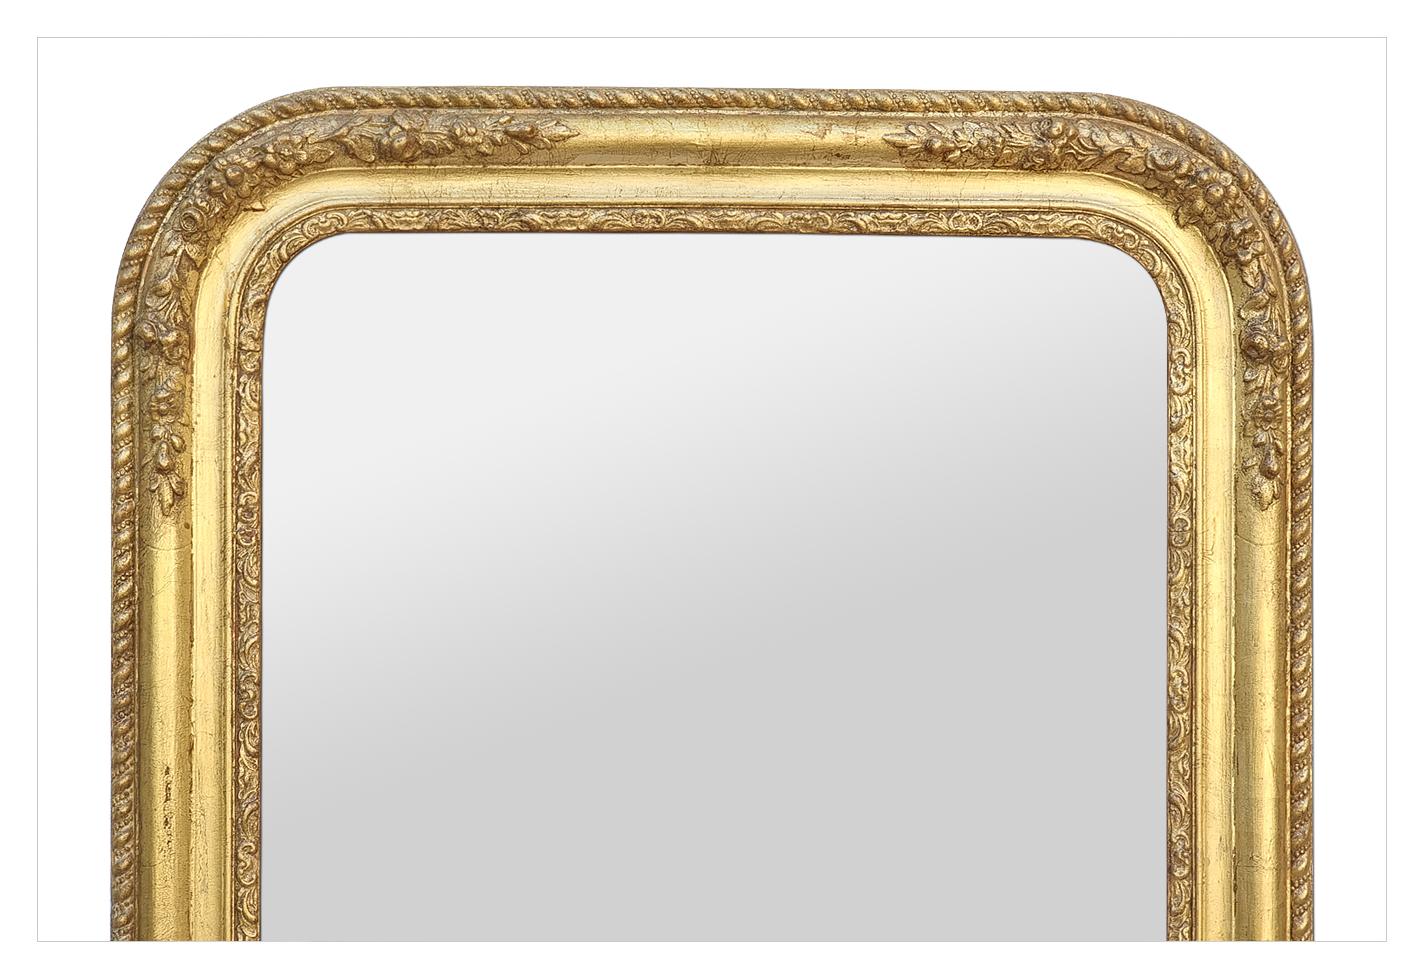 Louis Philippe French Antique Mirror, Louis-Philippe Style, Romantic Inspiration, circa 1860